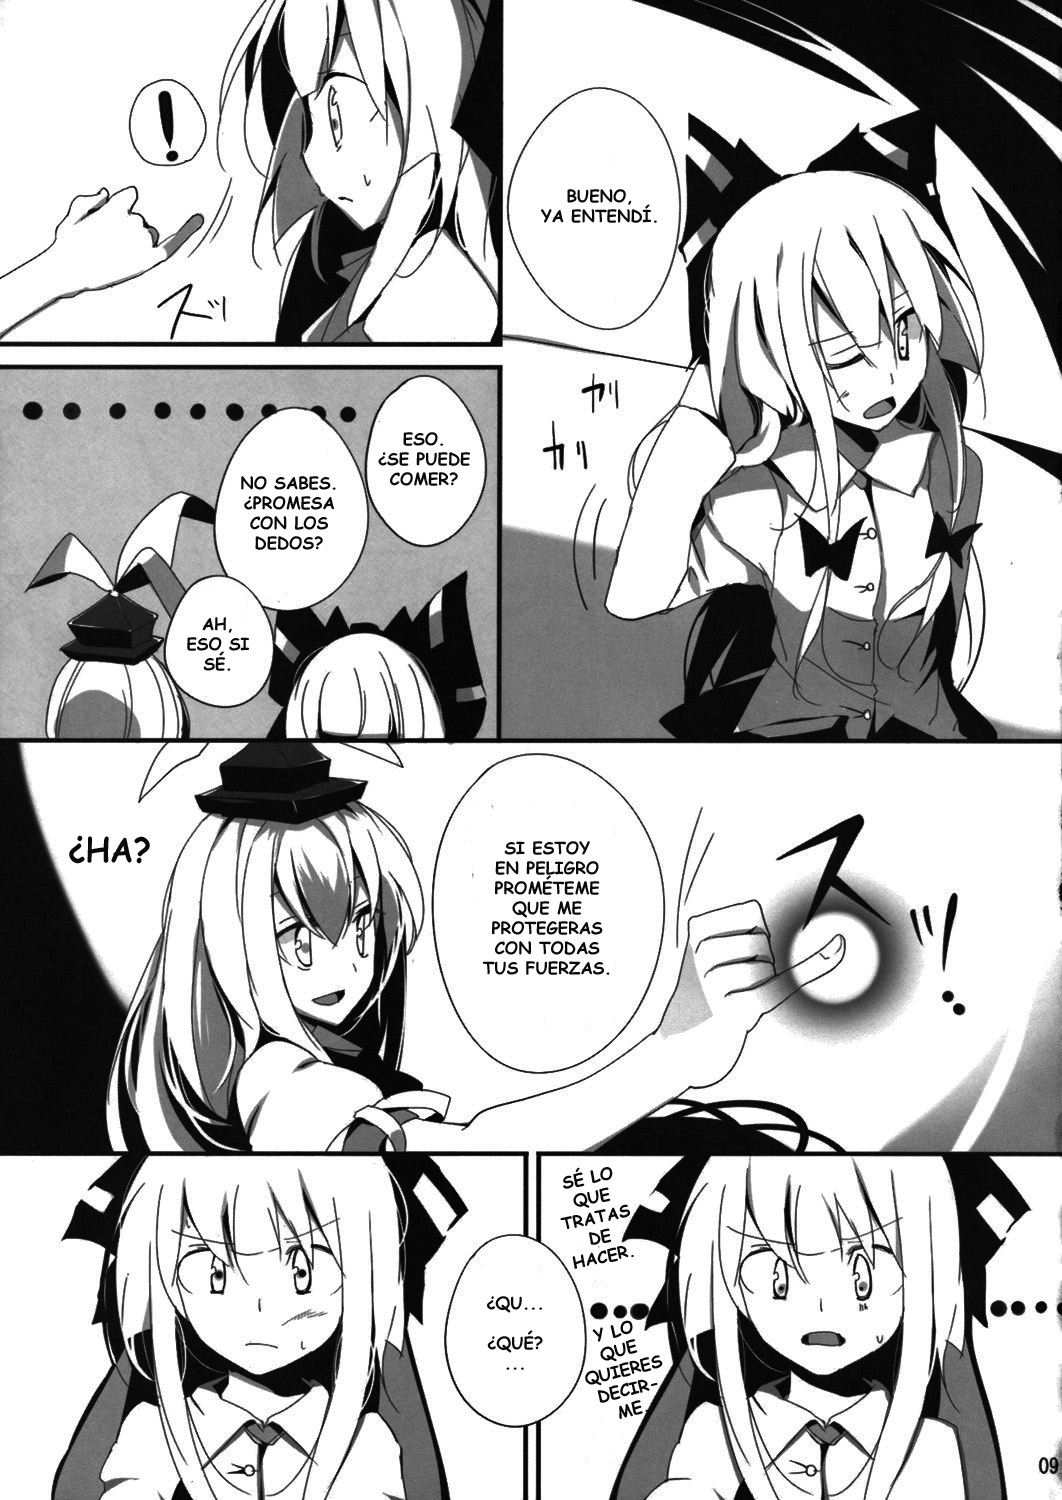 (C76) [Usotsukiya, Oppore-Coppore (BeLL, Oouso)] Flandre Student (Touhou Project) [Spanish] 8